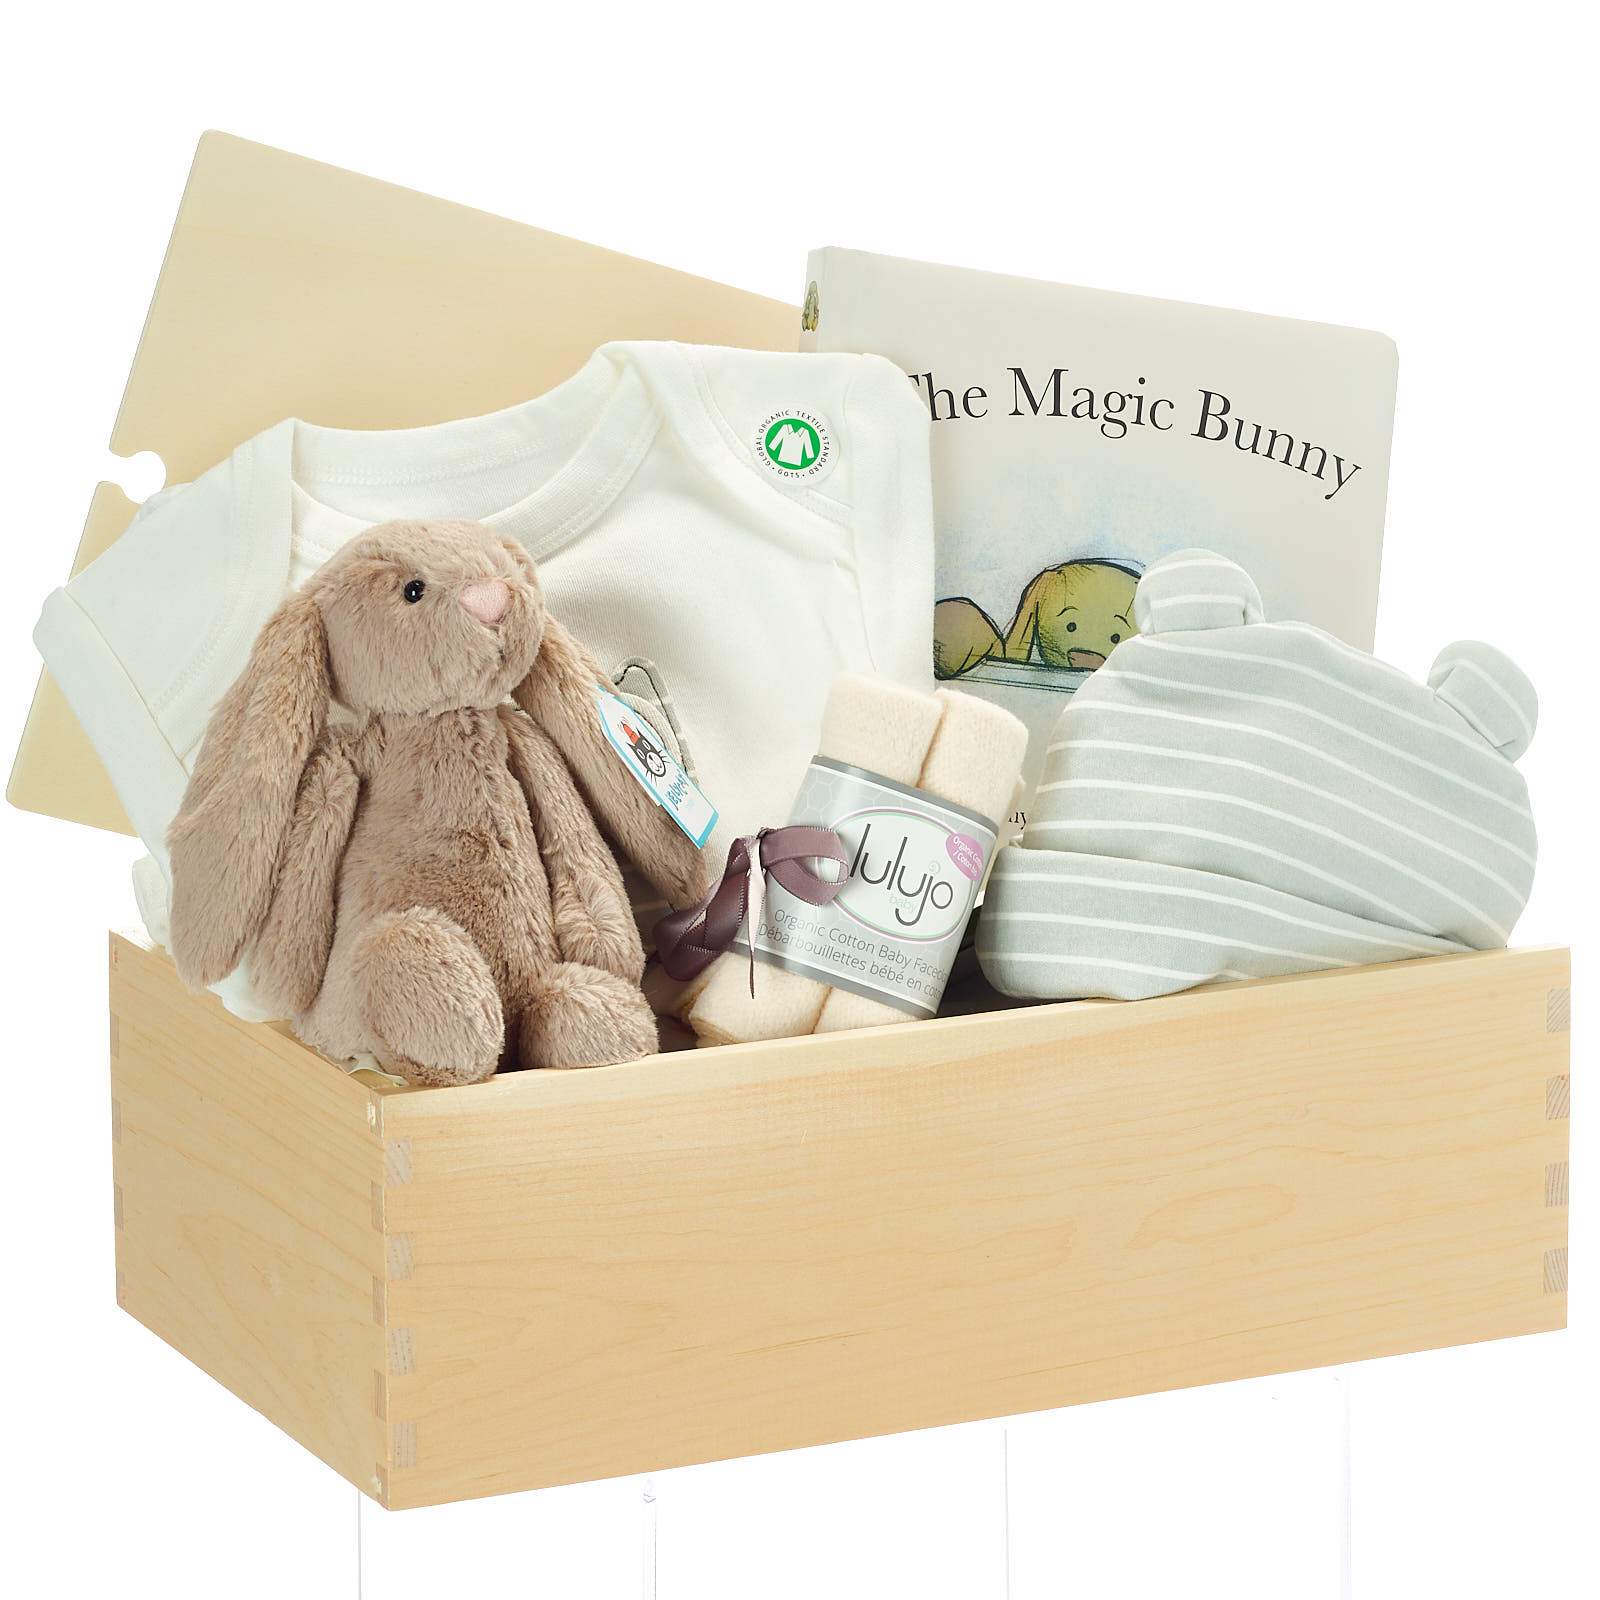 Neutral Baby Gifts